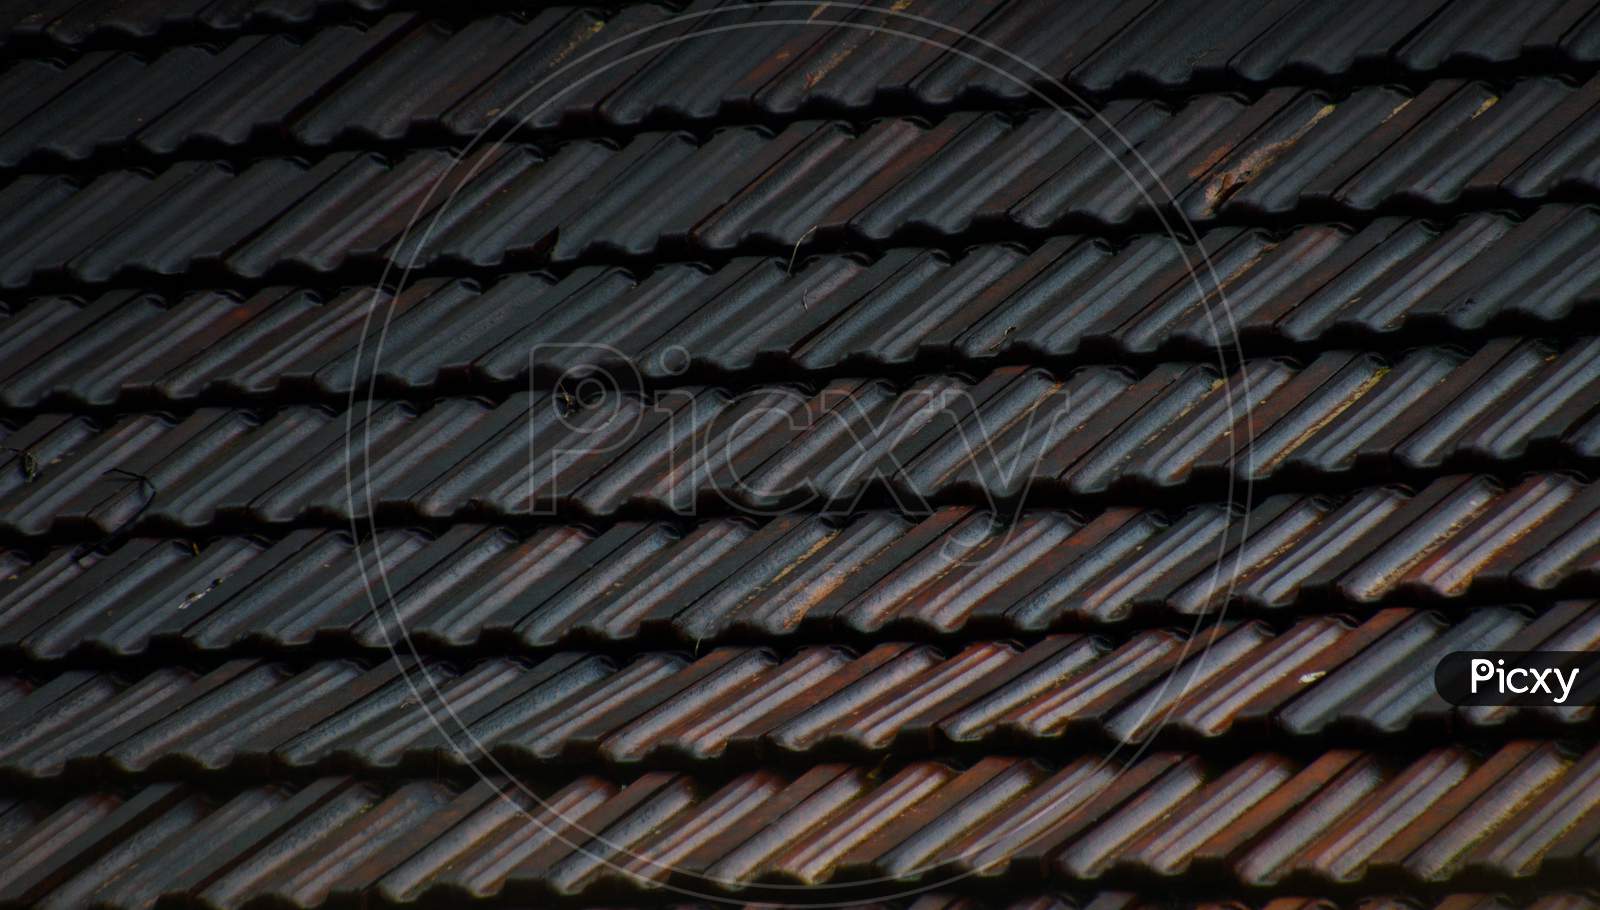 Pattern Created By Roof Tiles